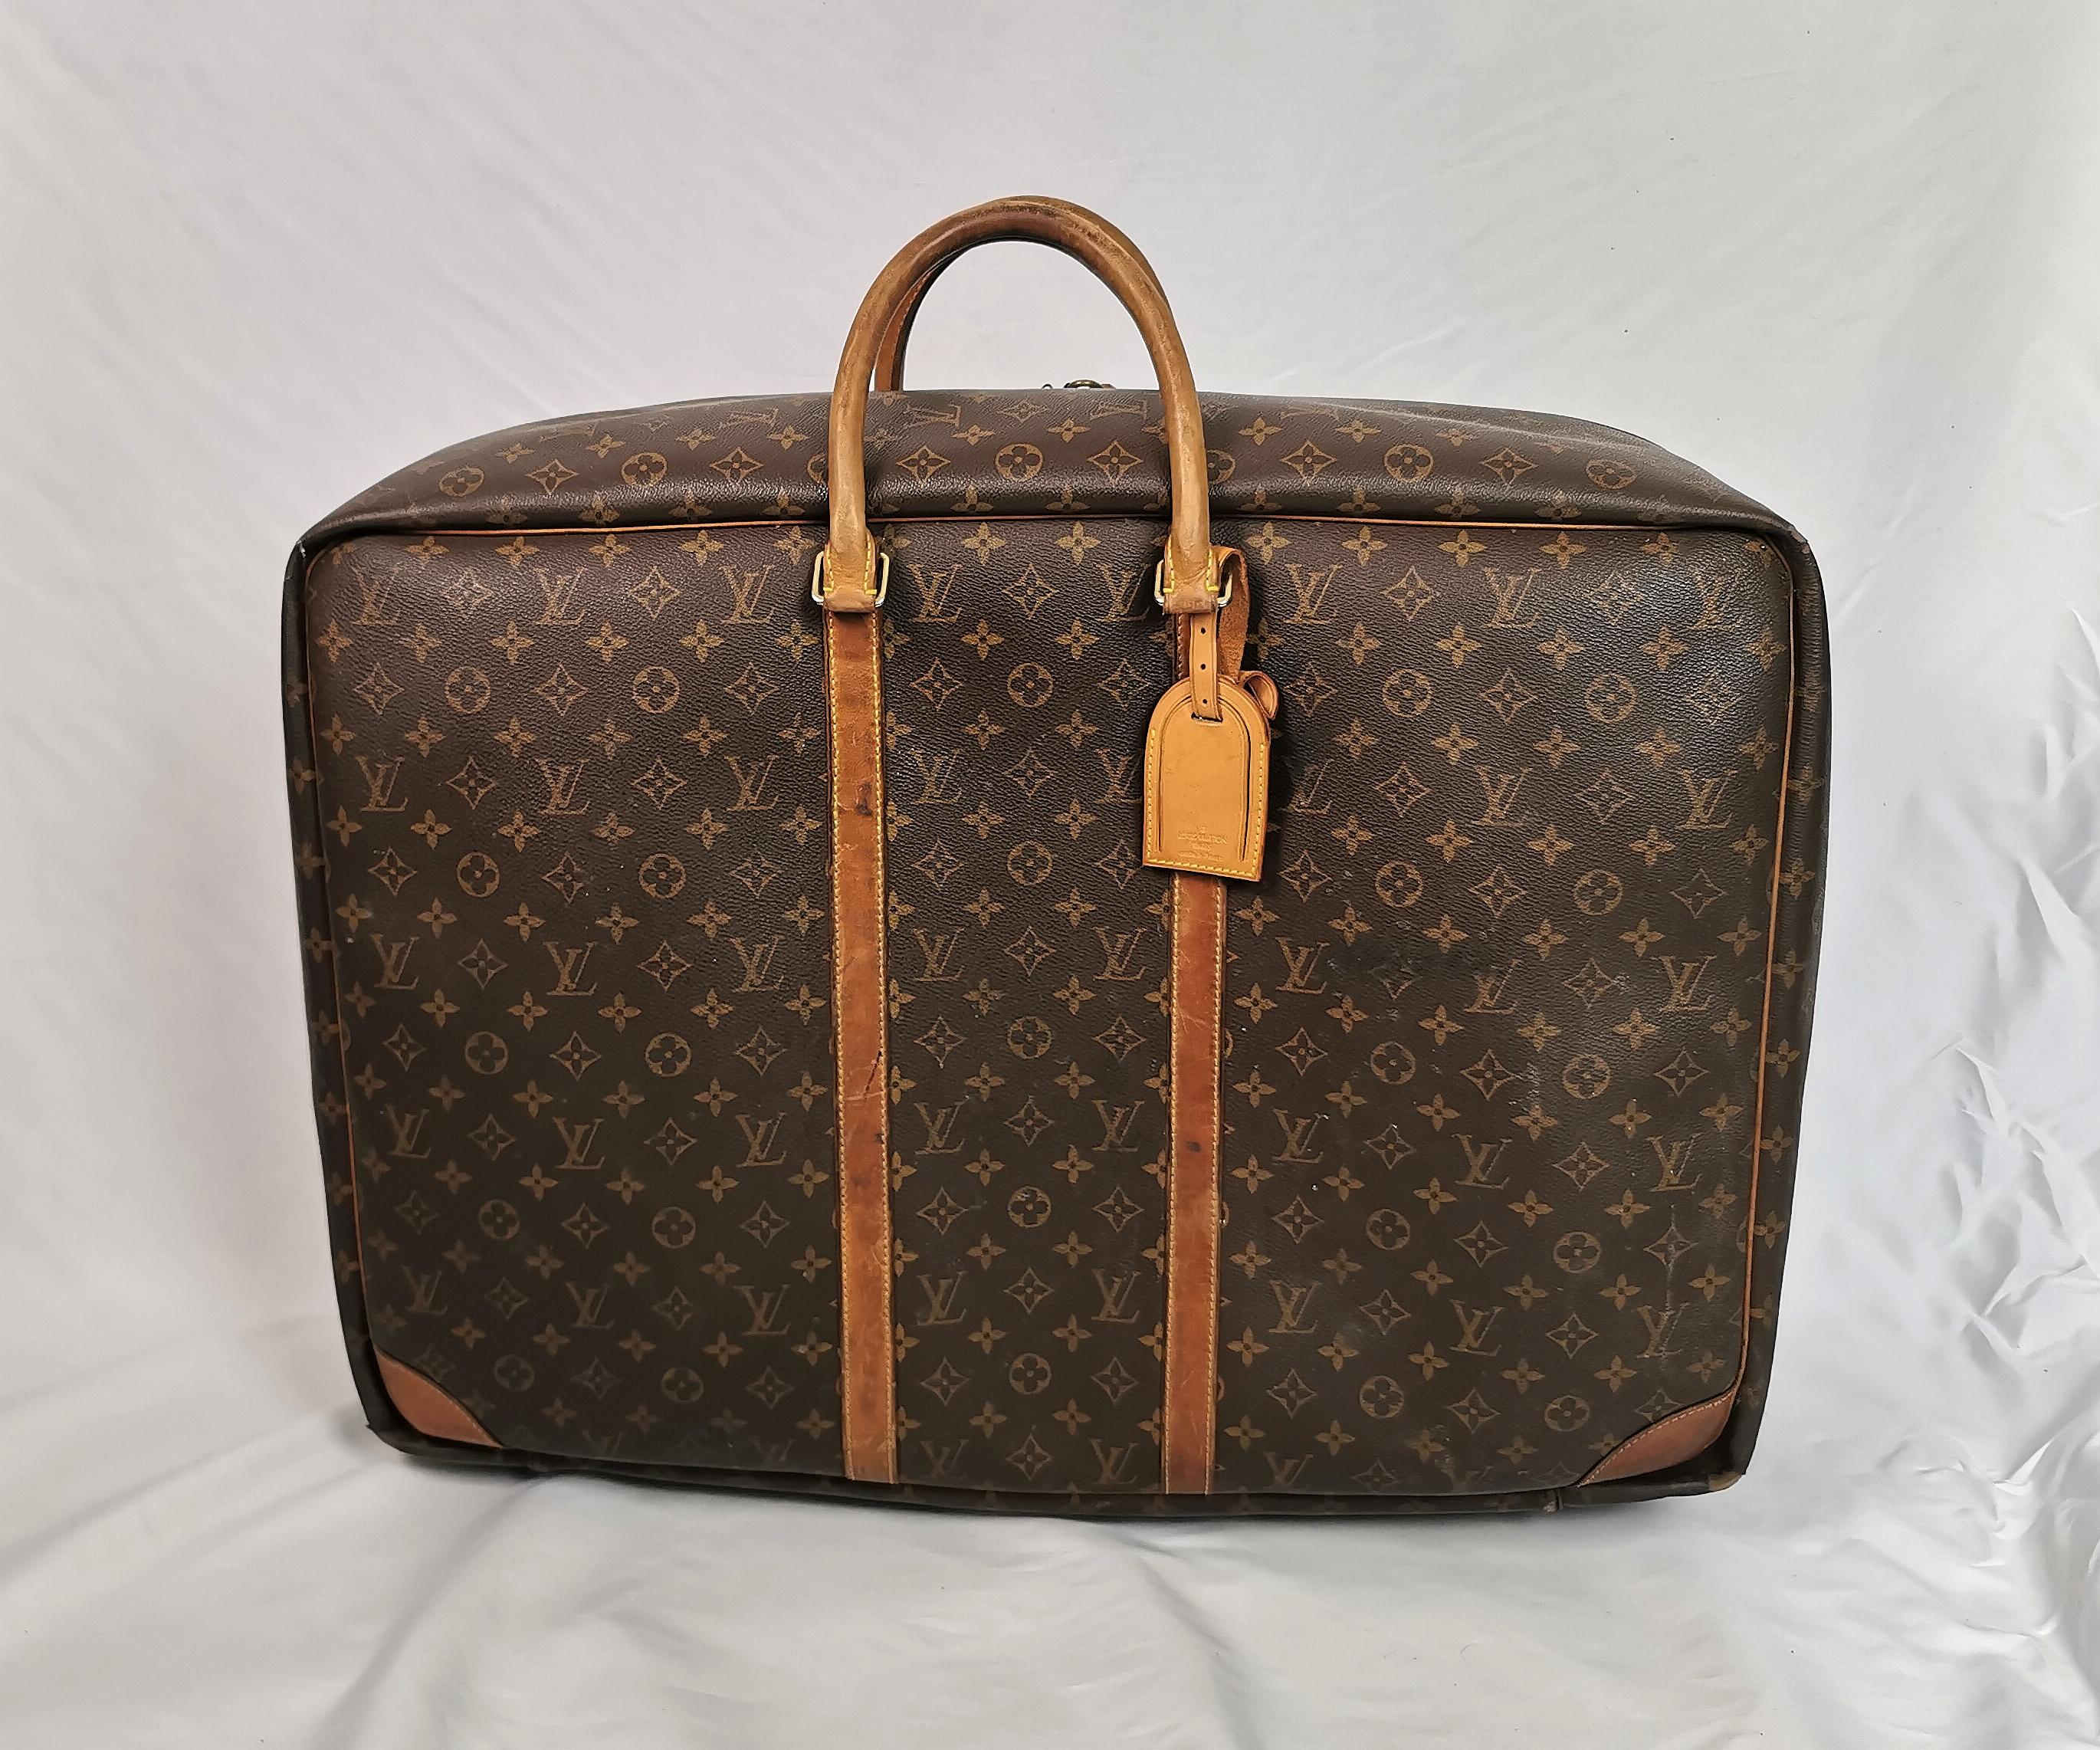 A gorgeous classic, Vintage Louis Vuitton Sirius 65 extra large suitcase.

Coated canvas with the signature LV monogram design, Vachetta leather trim and handles with gold tone hardware.

Lined in brown cotton fabric.

This design is truly